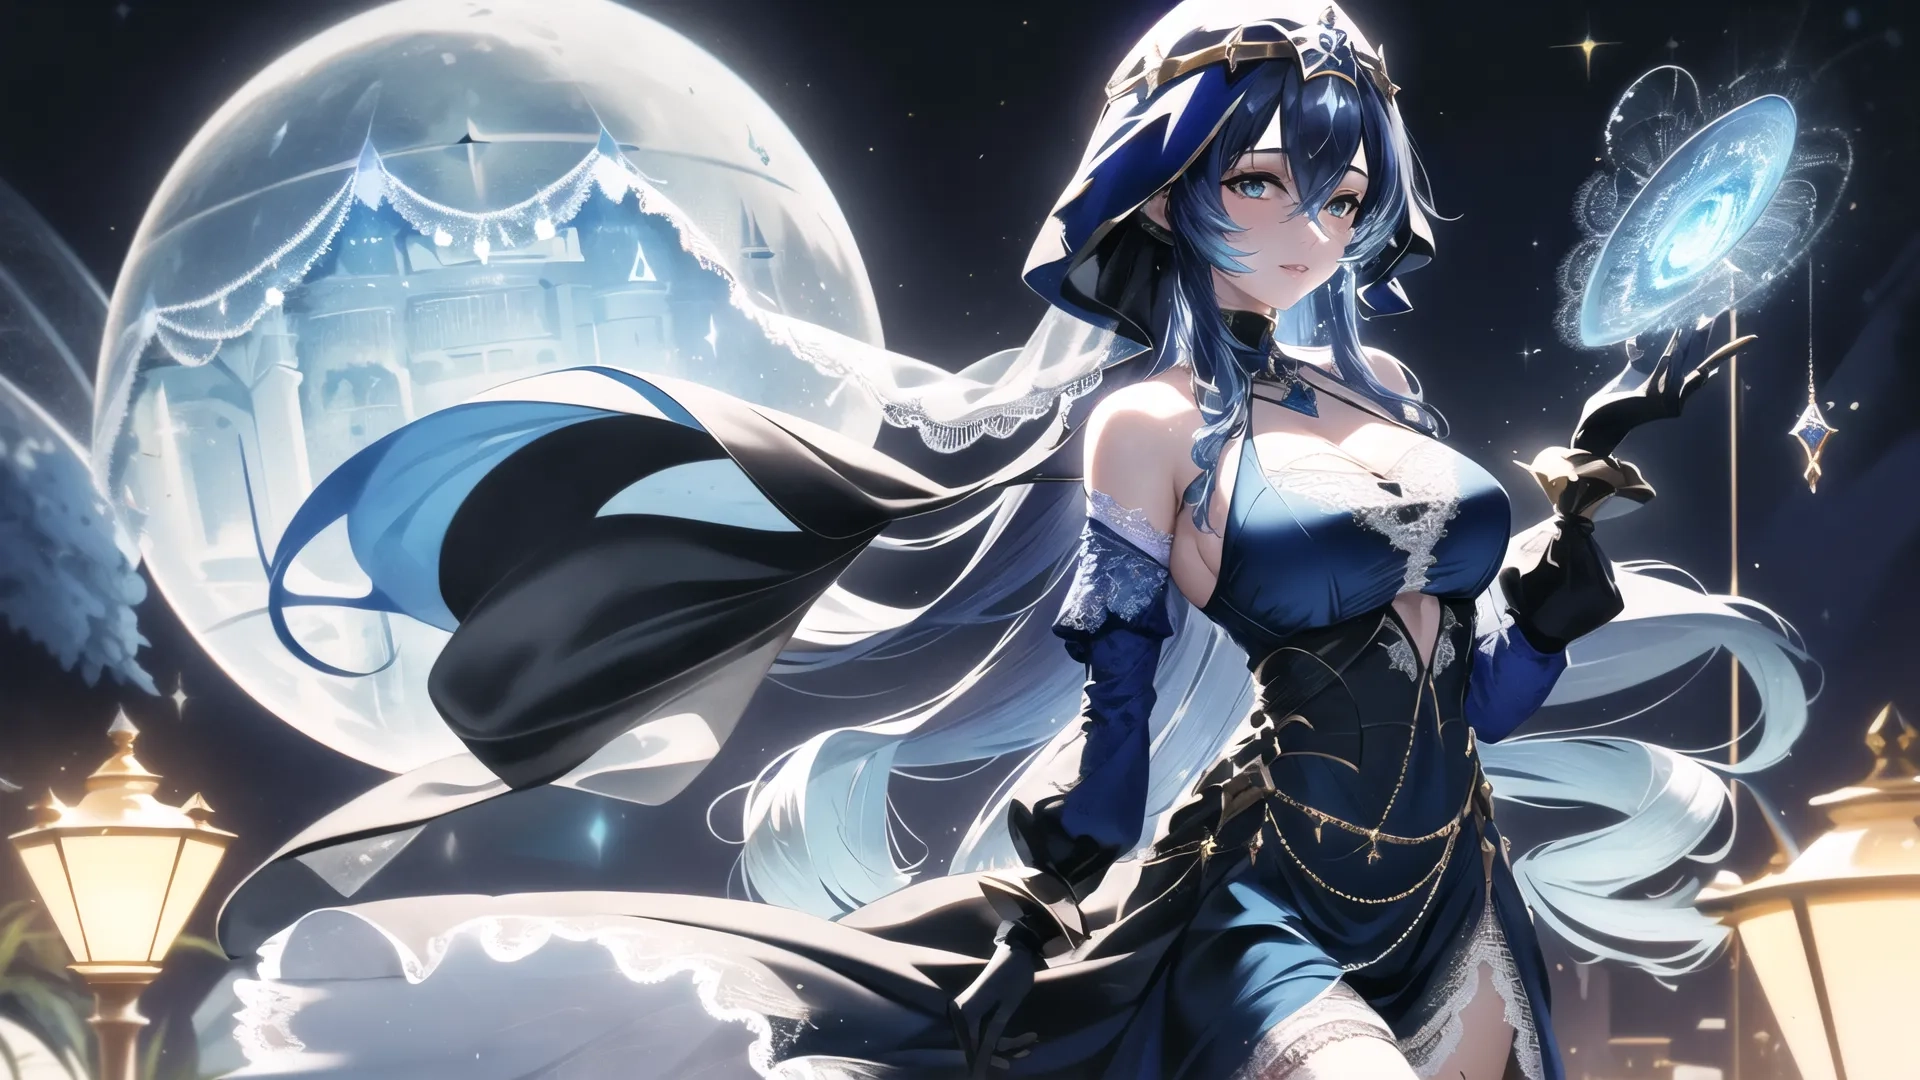 a japanese figure stands near a moon lit castle in the sky and holds a wand in her right hand, wearing dark clothing and holding the wand
